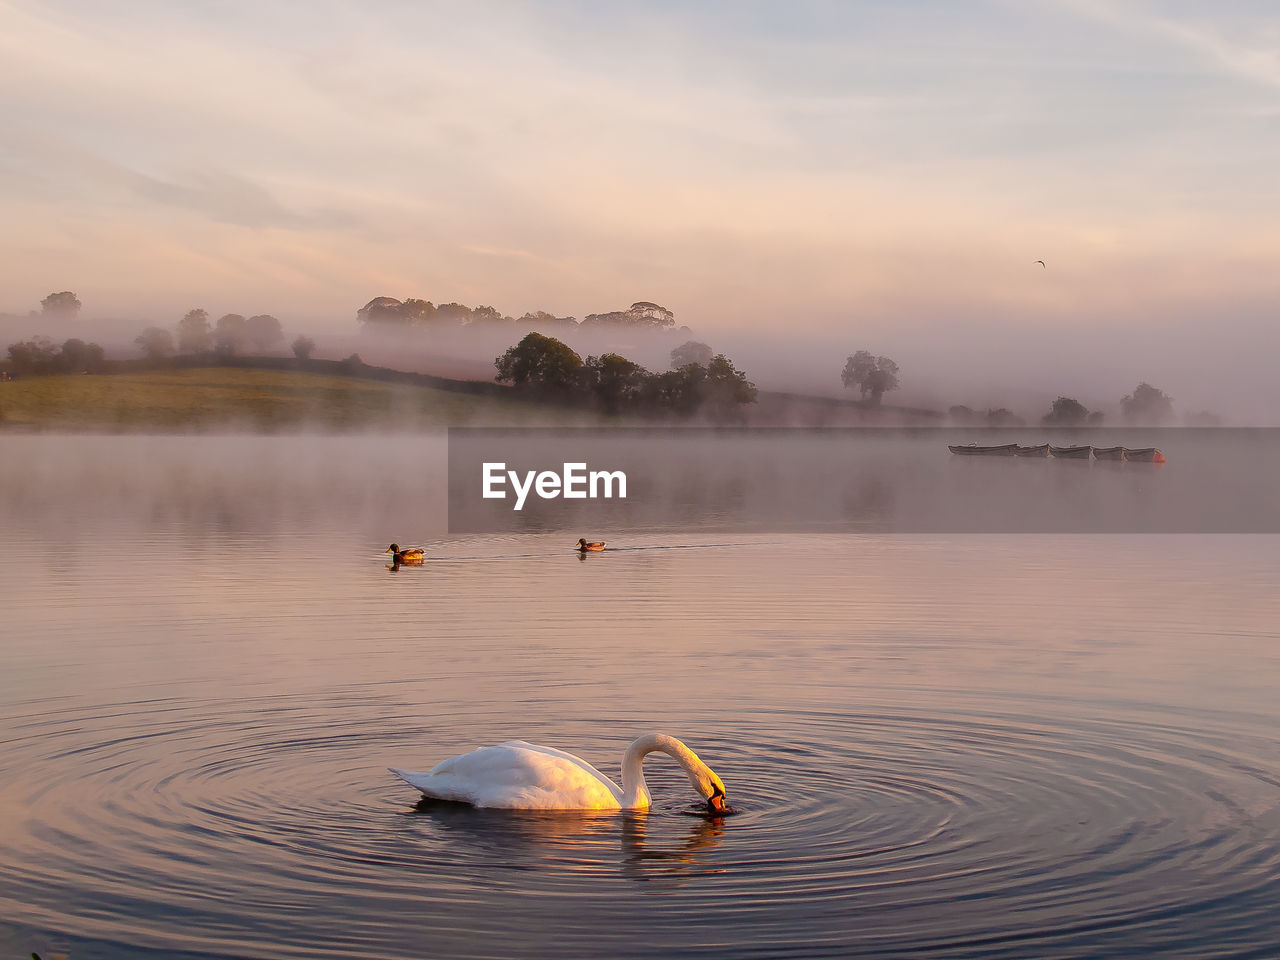 Swan swimming in lake against sky during foggy weather